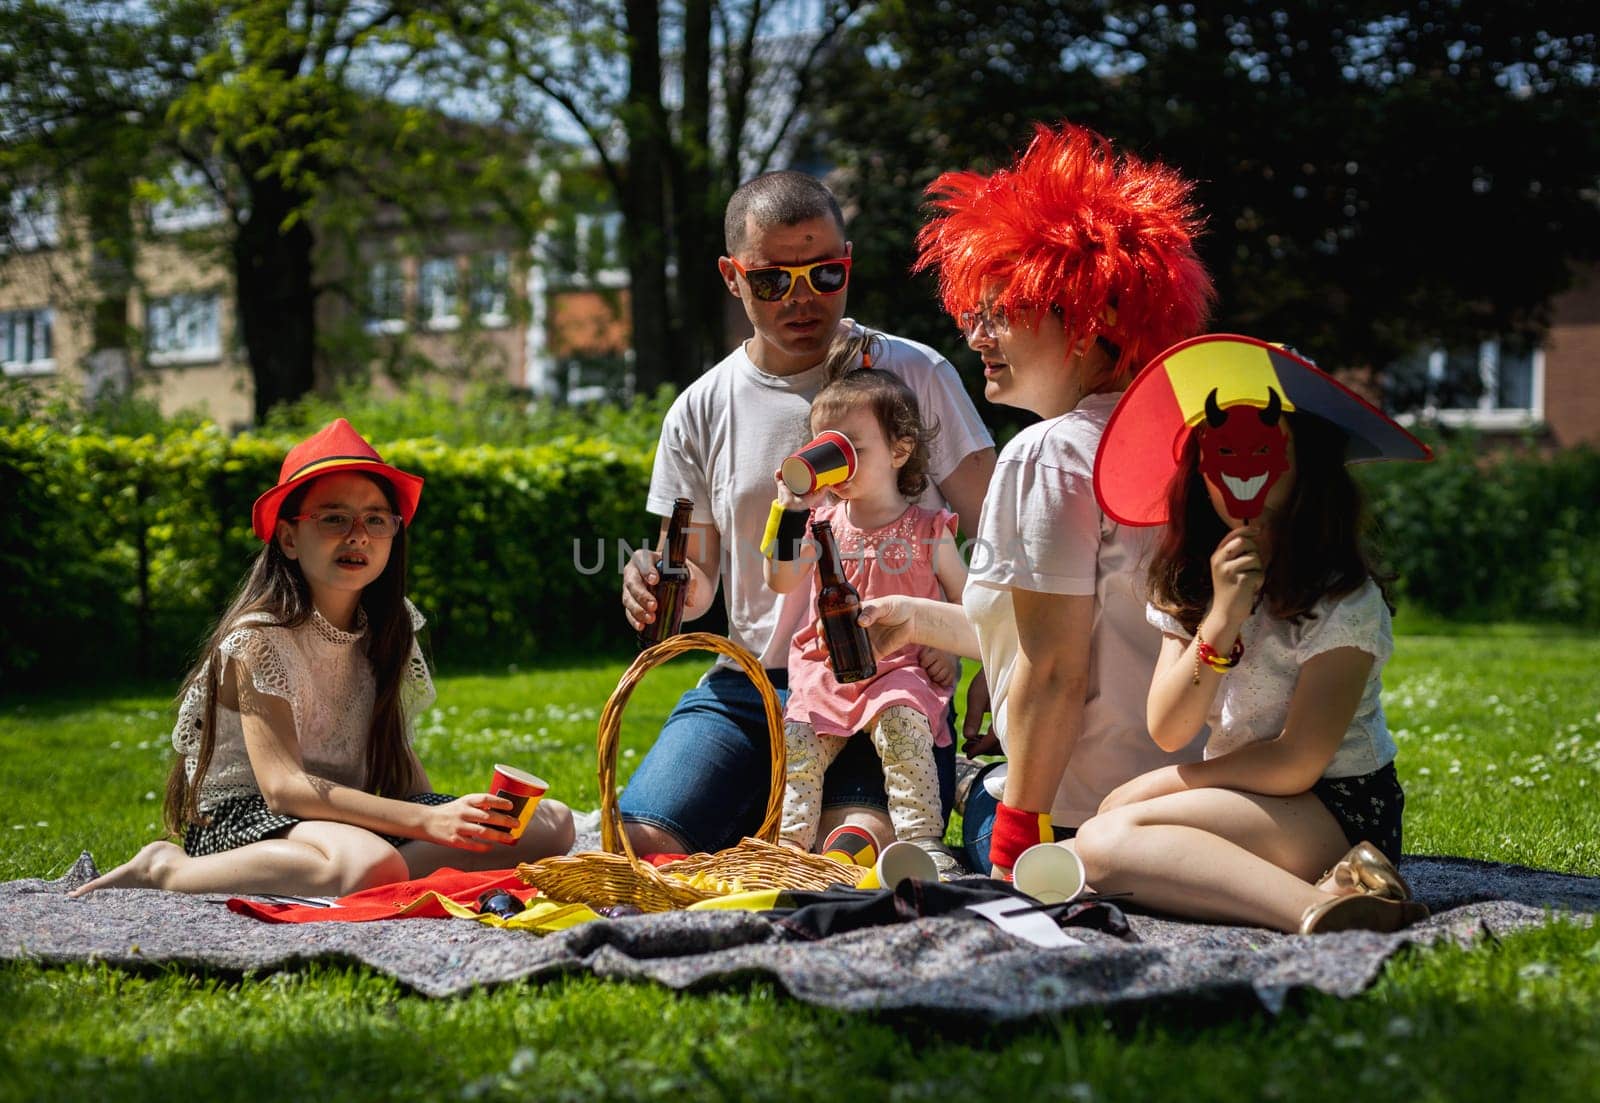 Portrait of beautiful and happy caucasian parents with three kids girls, drinks in their hands, celebrating Belgian day at a picnic in a city park on a sunny summer day, close-up top view.